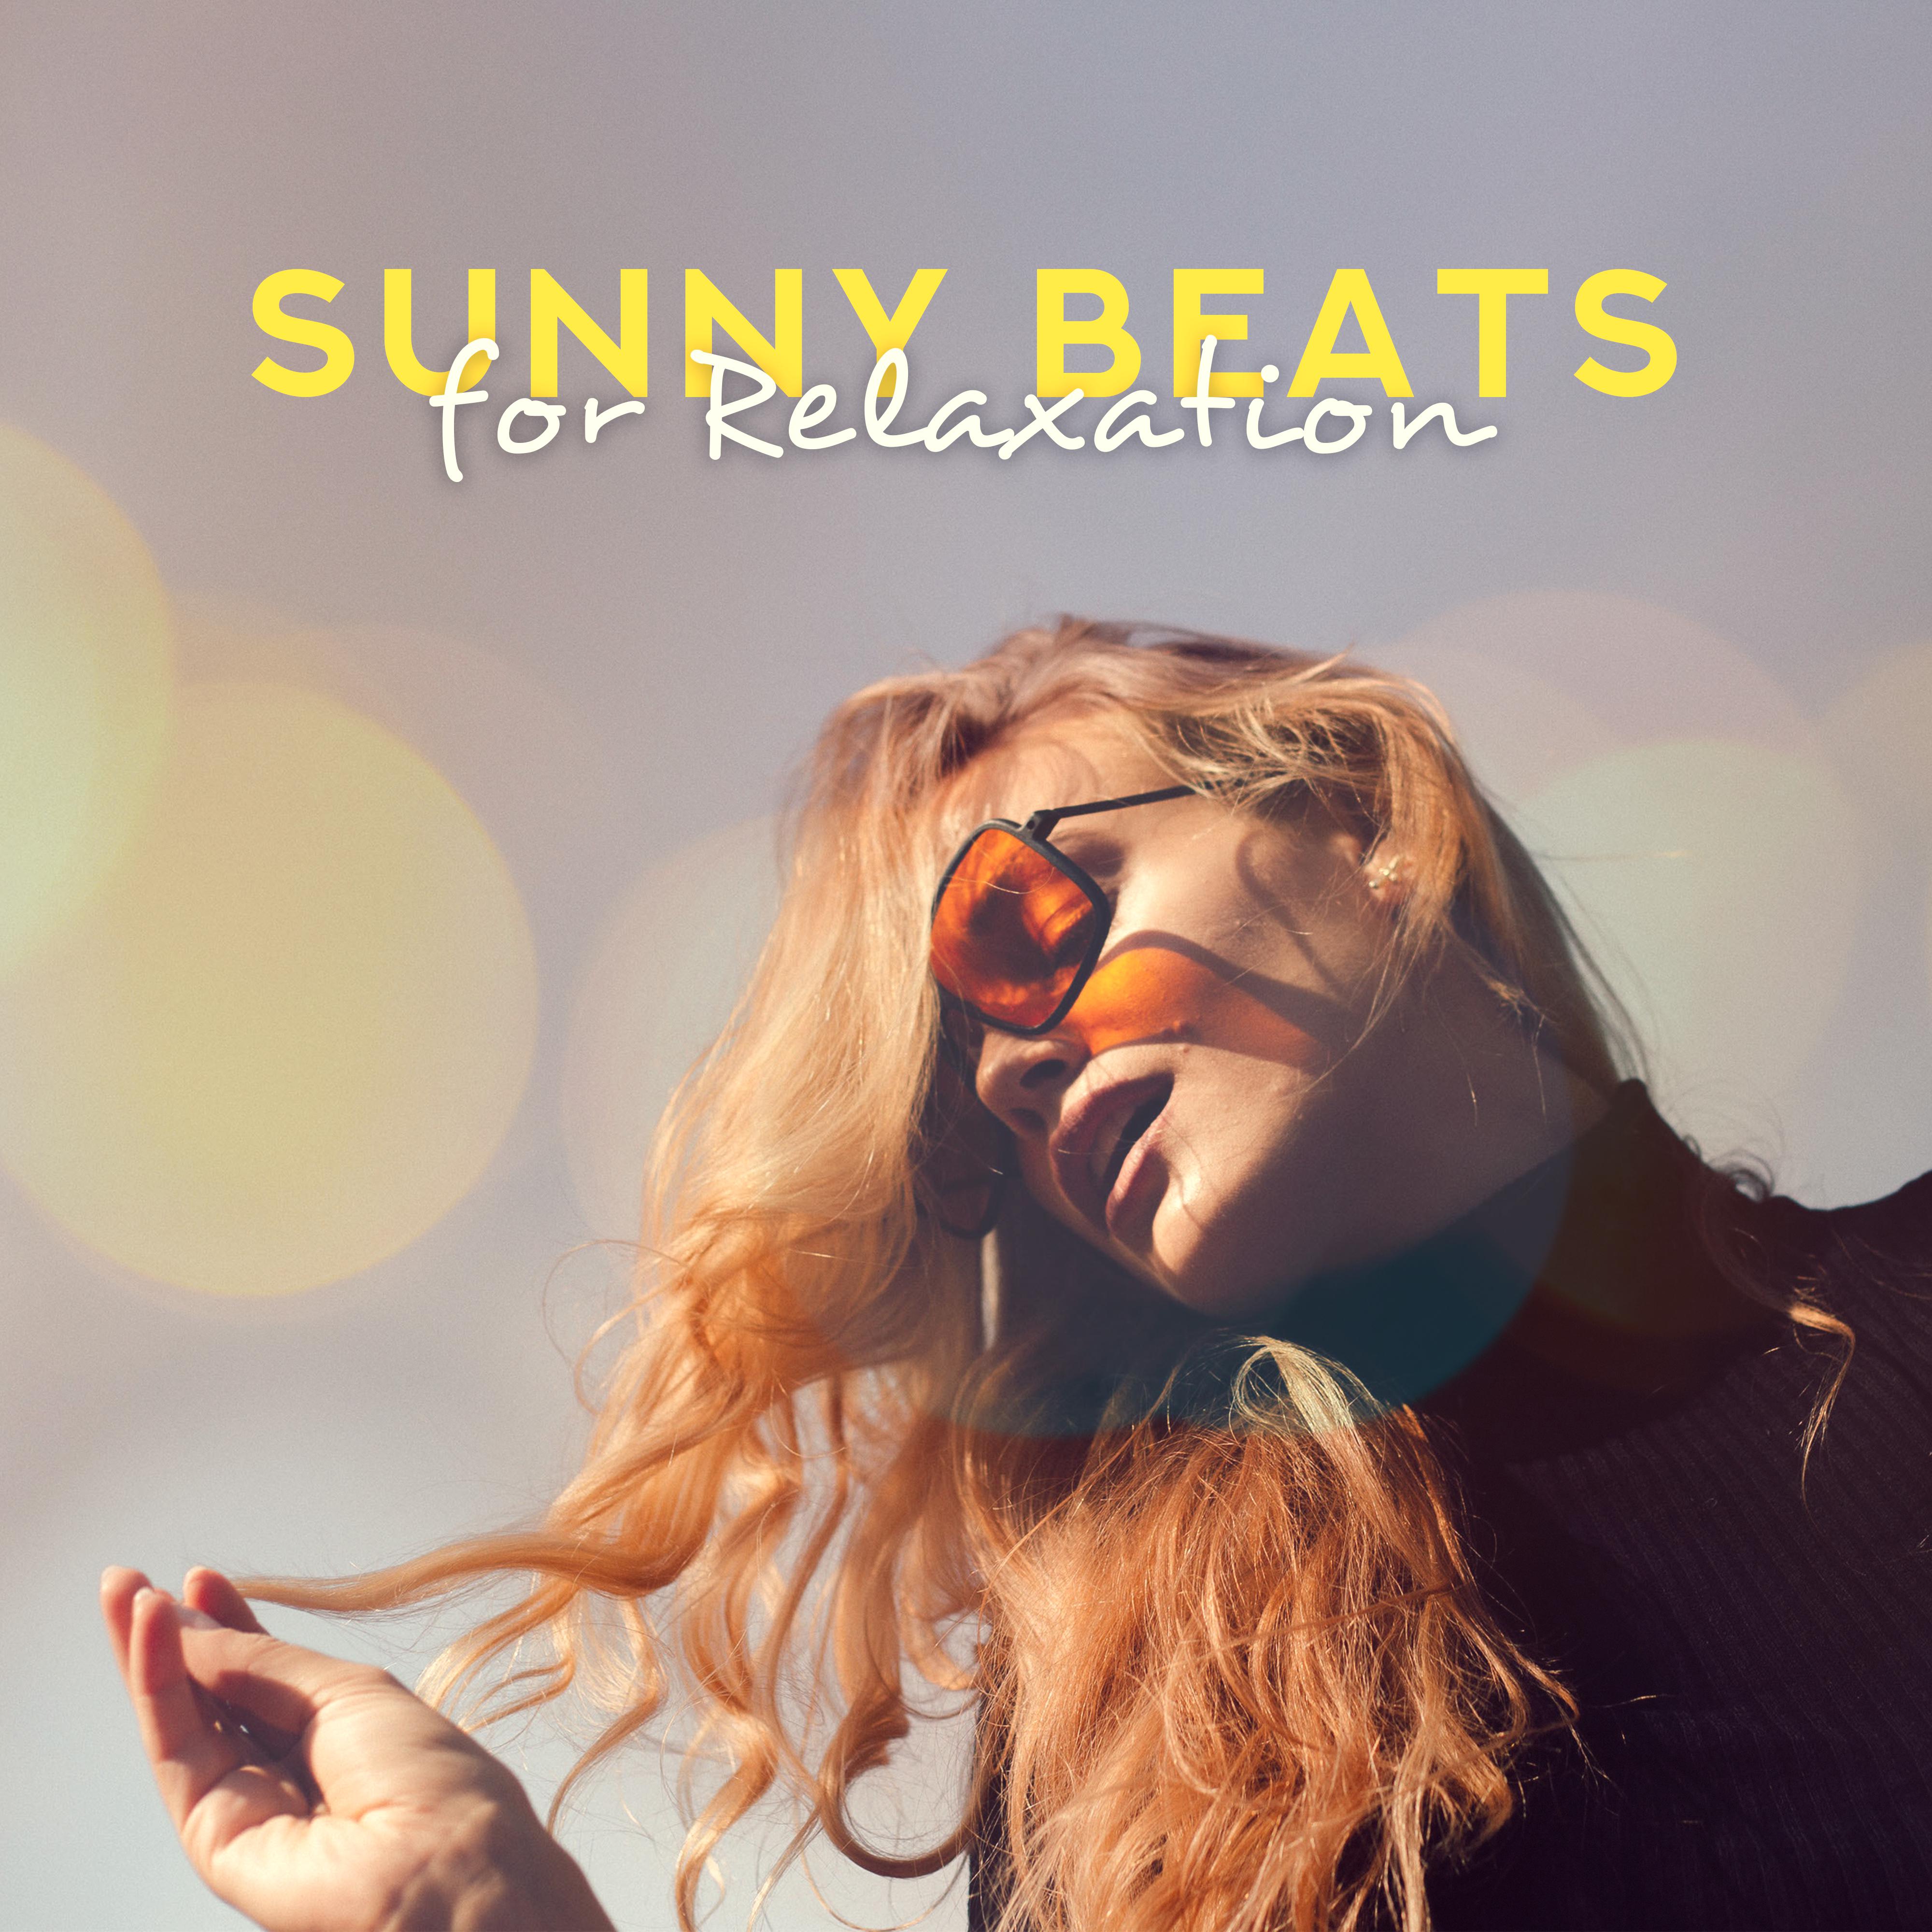 Sunny Beats for Relaxation – Ibiza Chill Out, Lounge Music, Summertime, Ibiza Drink Bar, **** Chillout Balearic, Beach Music